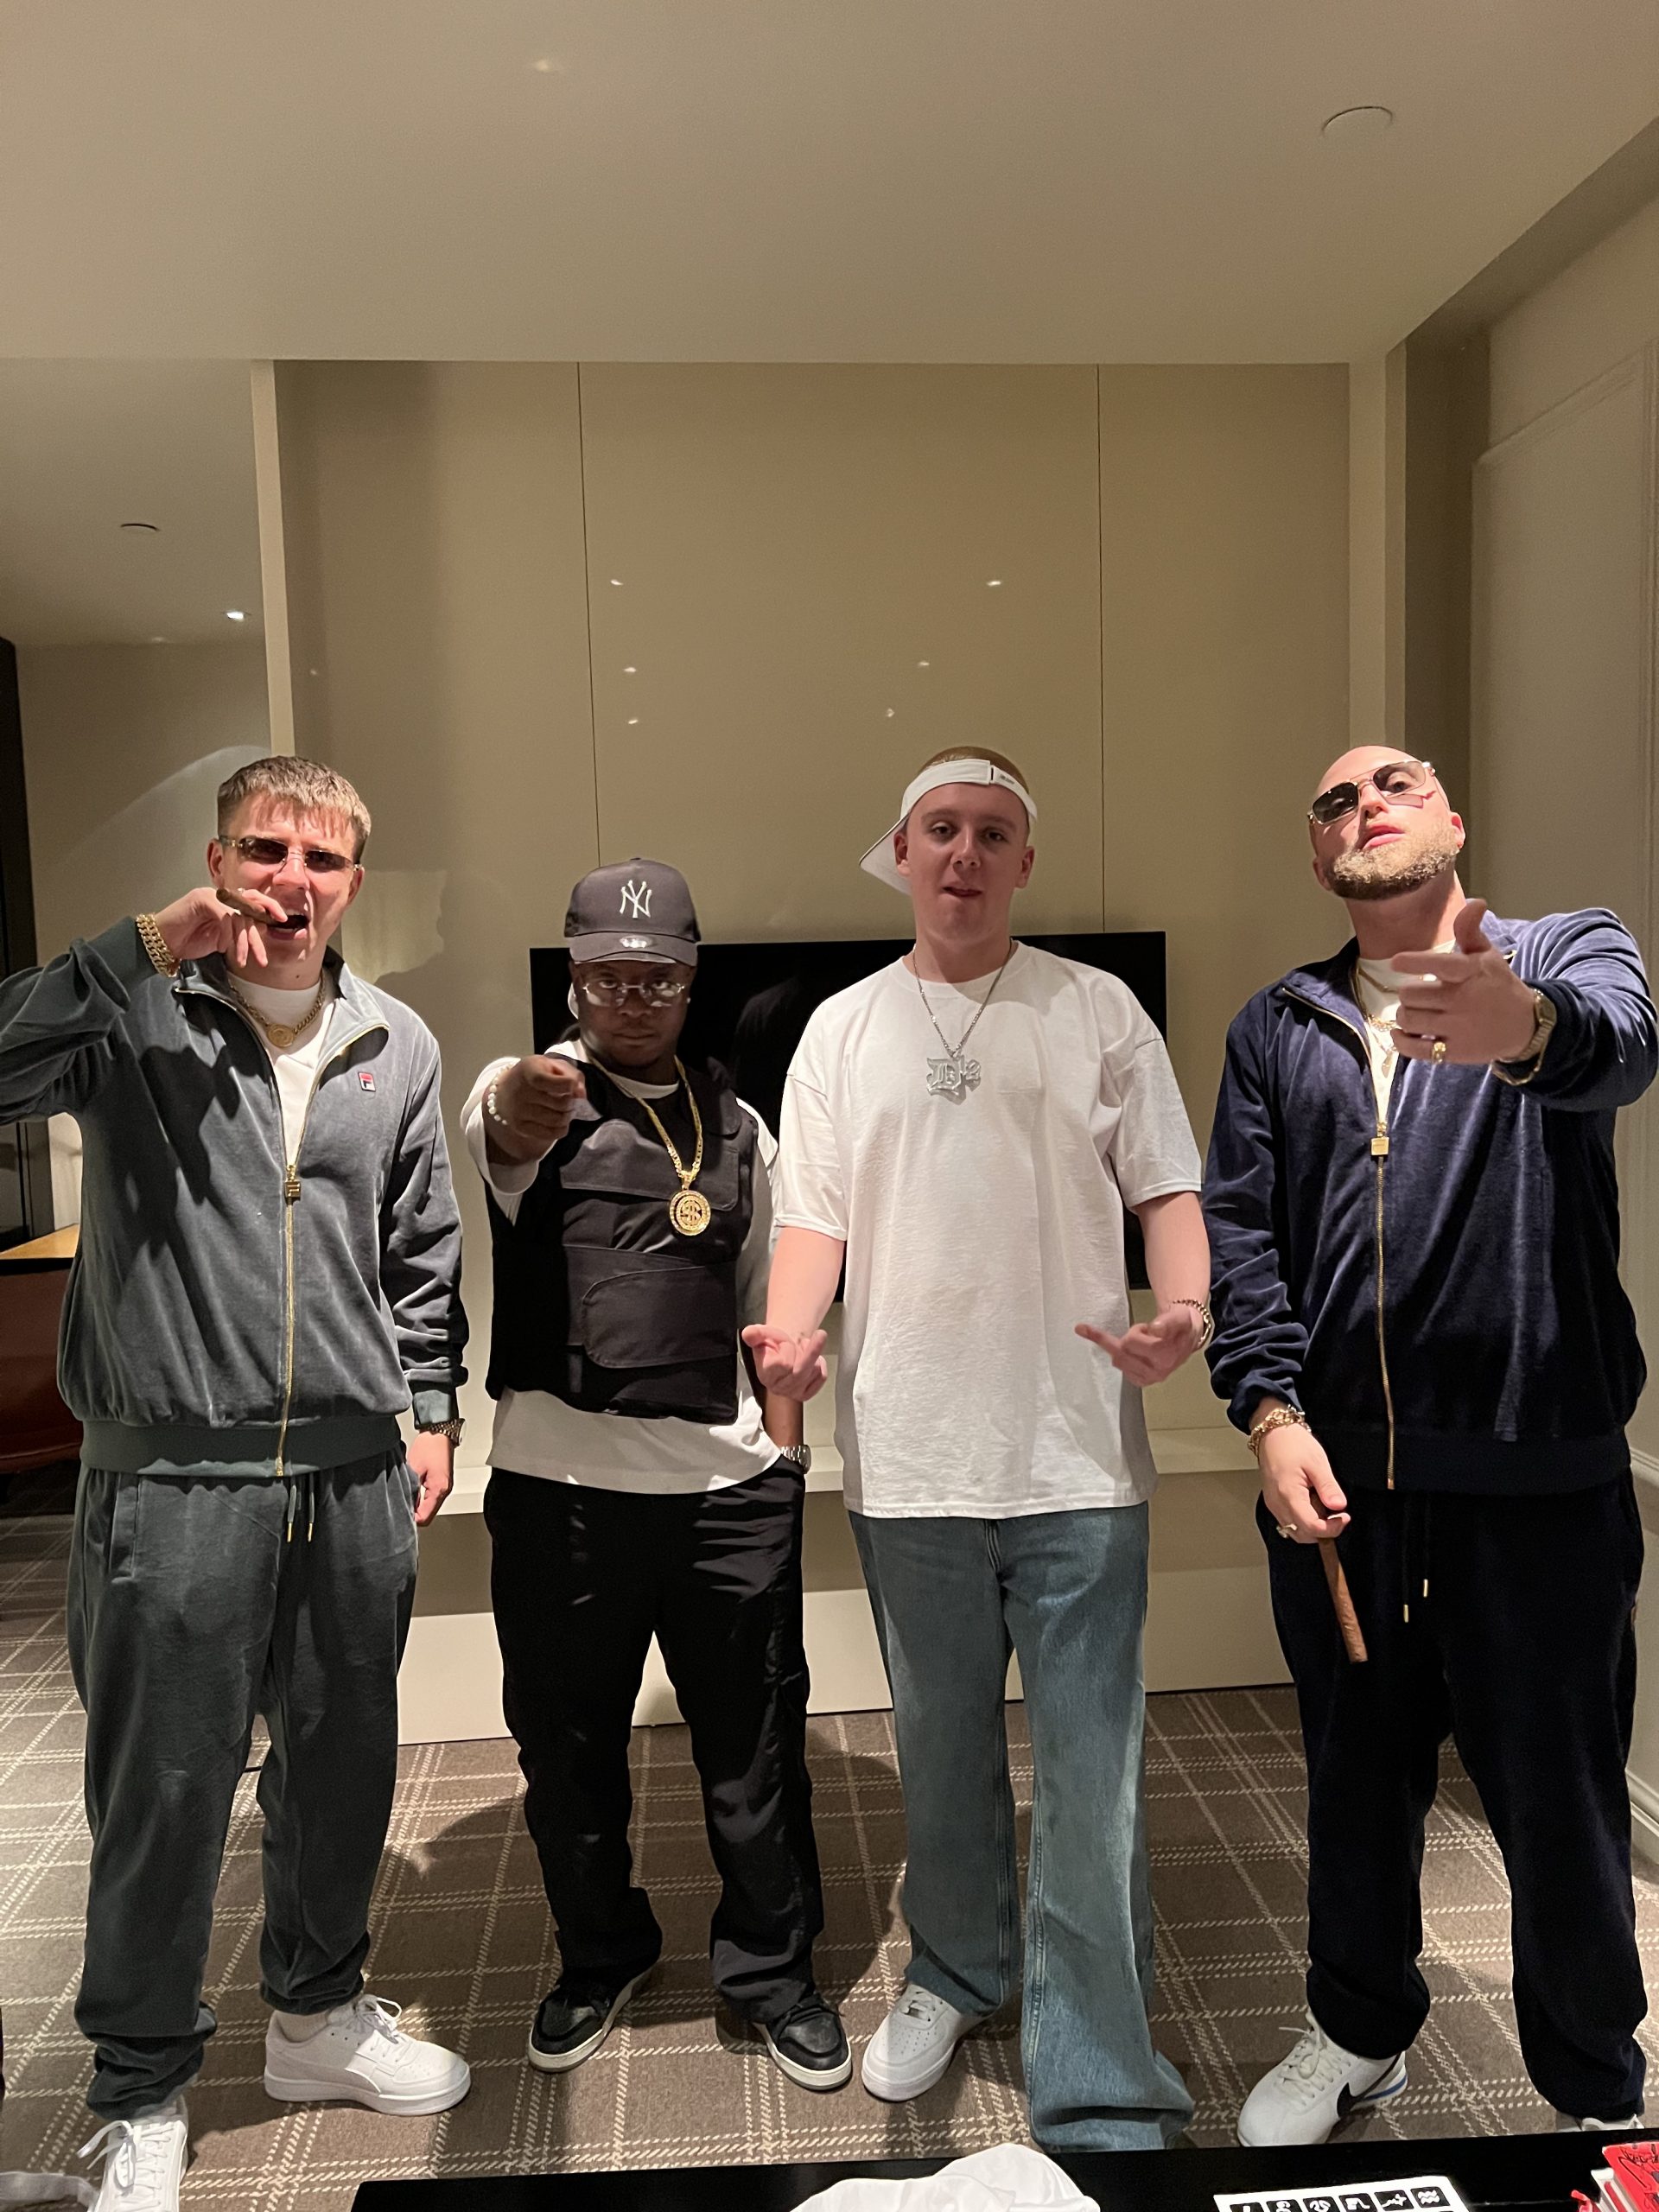 Aitch Dressed Up As Eminem for Halloween